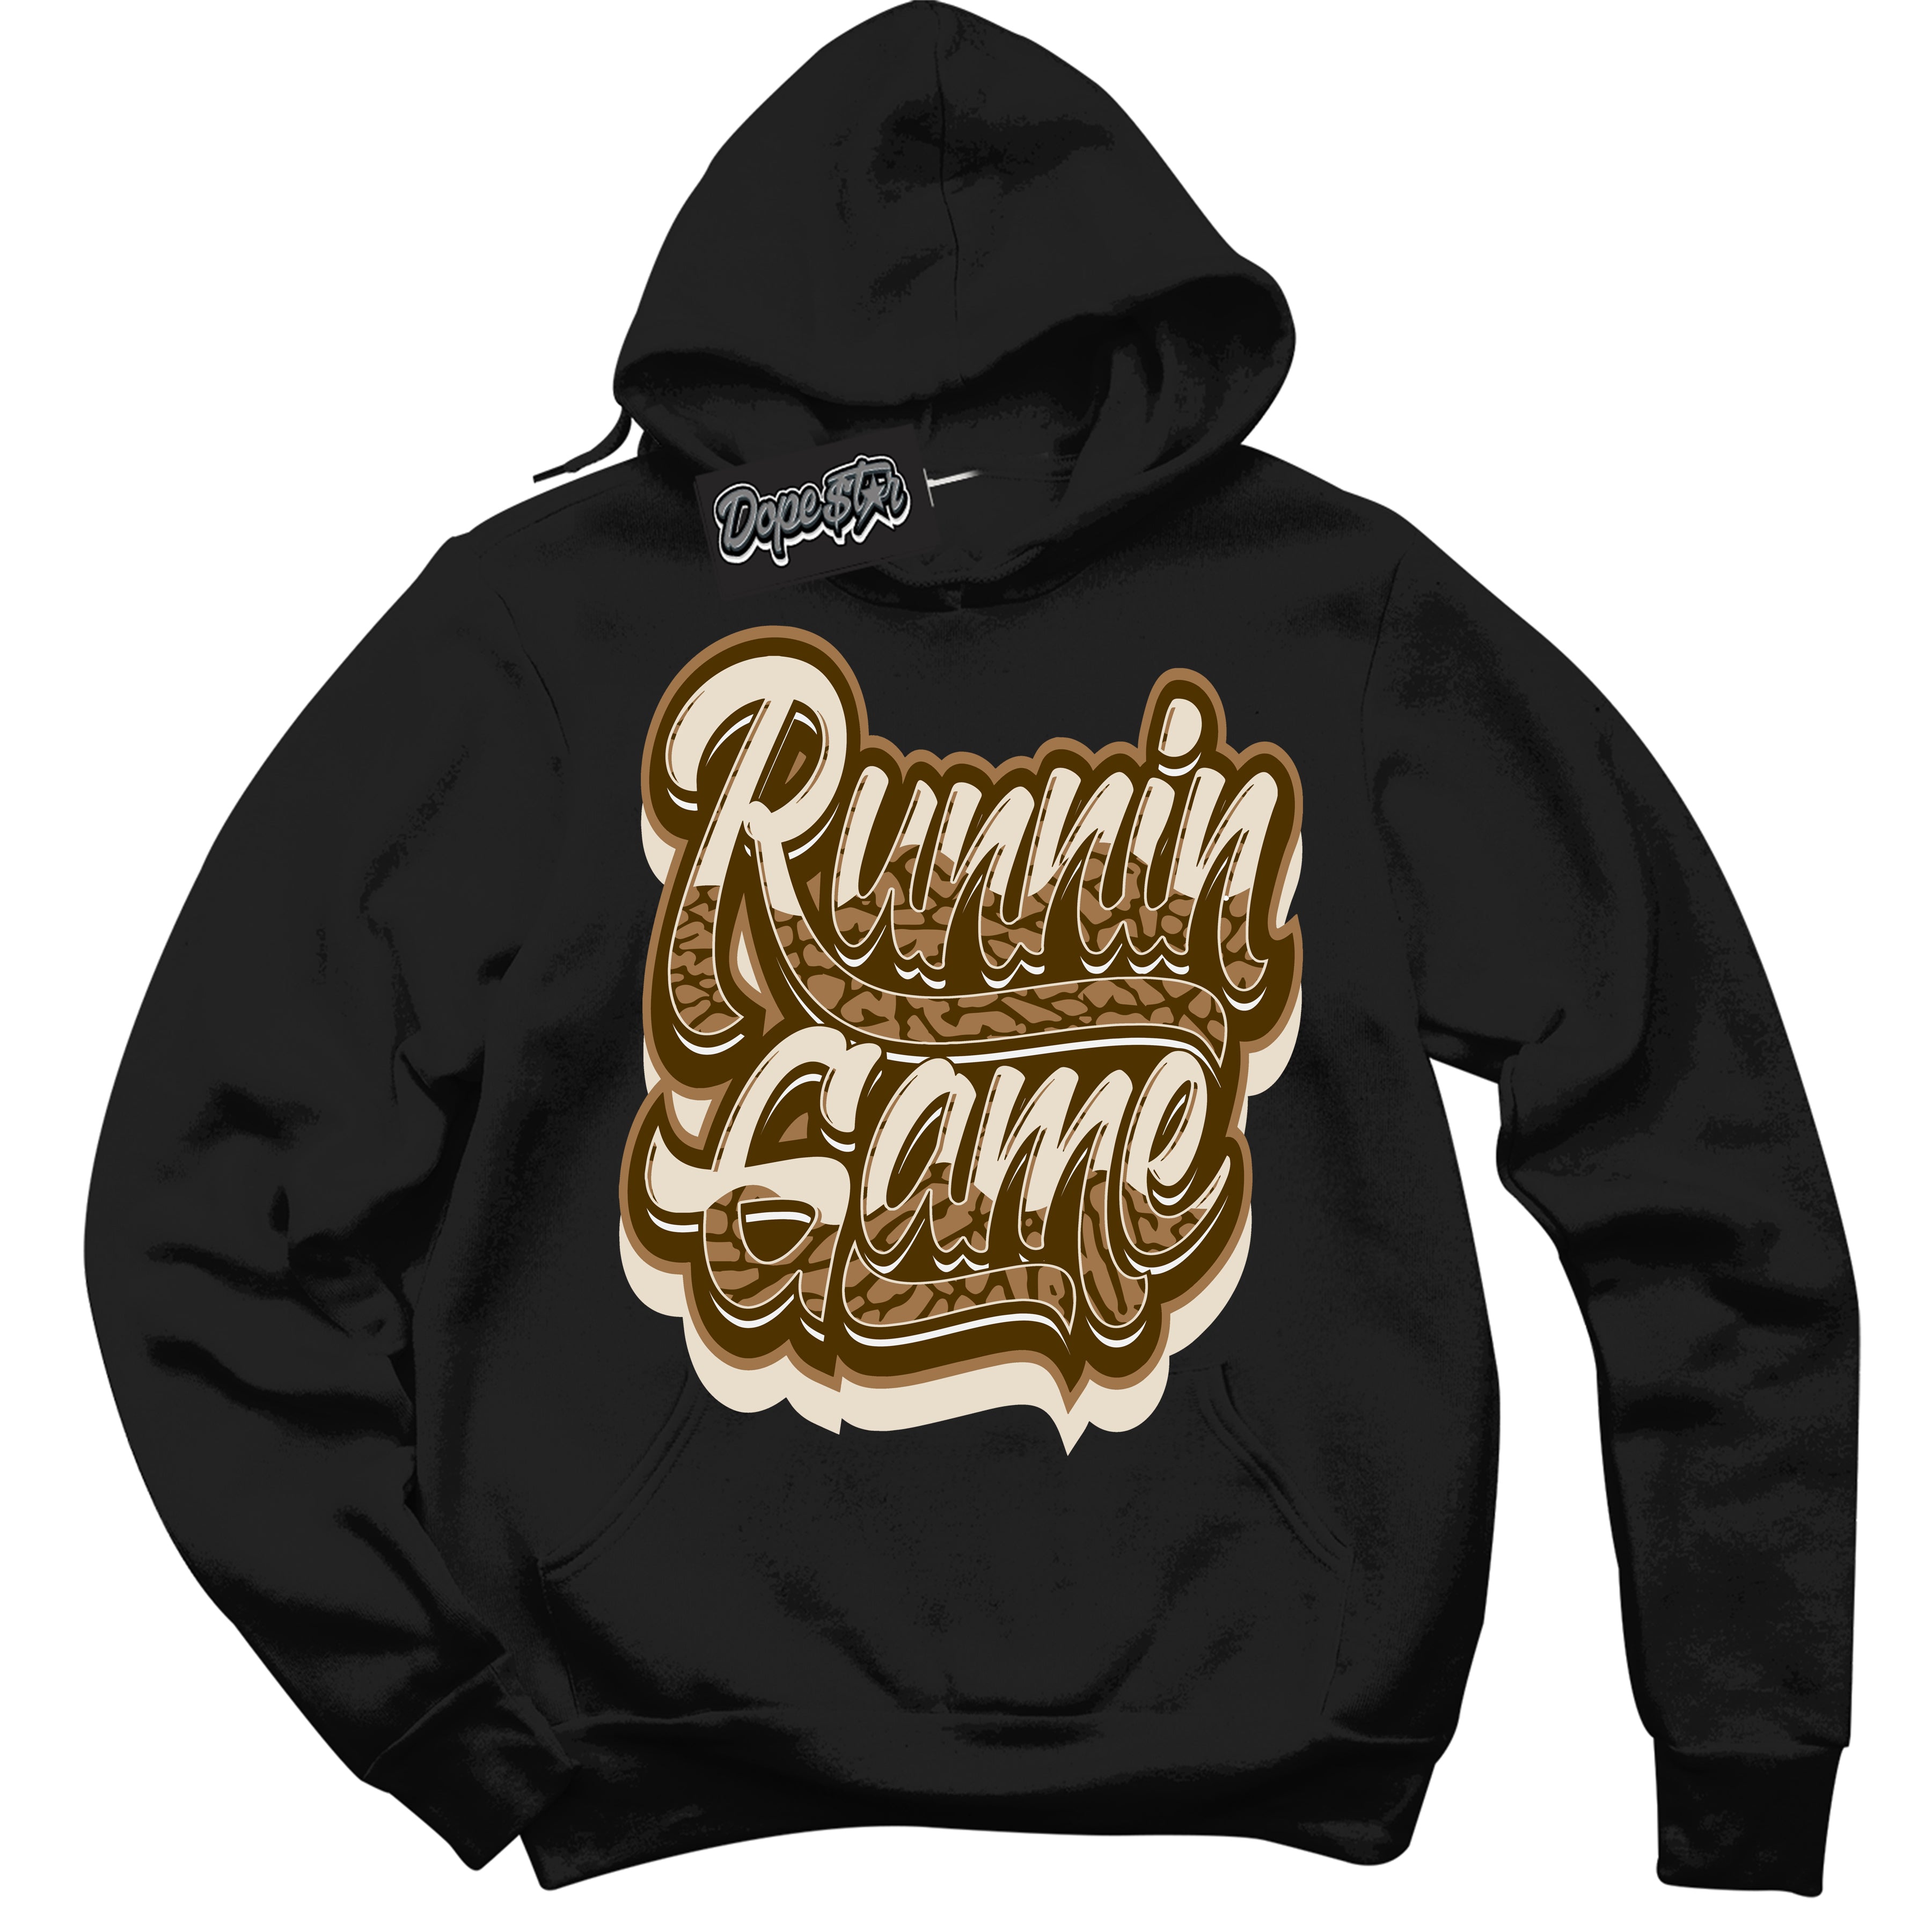 Cool Black Graphic DopeStar Hoodie with “ Running Game “ print, that perfectly matches Palomino 3s sneakers